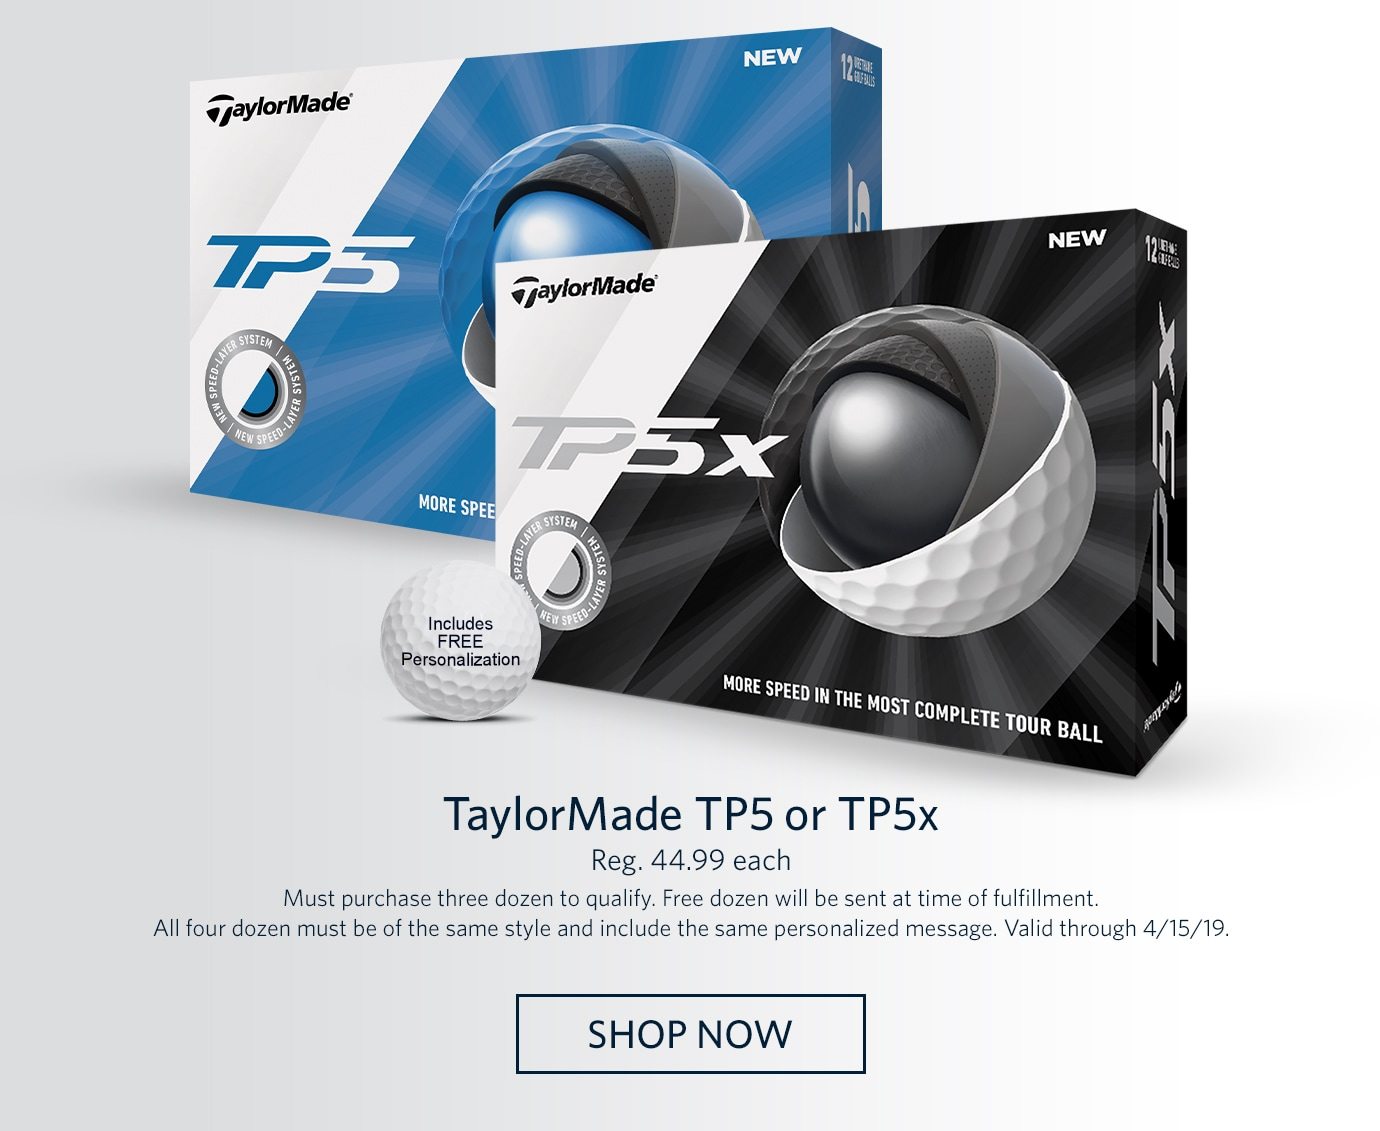 TaylorMade TP5 or TP5x | Reg. 44.99 each | Must purchase three dozen to qualify. Free dozen will be sent at time of fulfillment. All four dozen must be of the same style and include the same personalized message. Valid through 4/15/19. | SHOP NOW